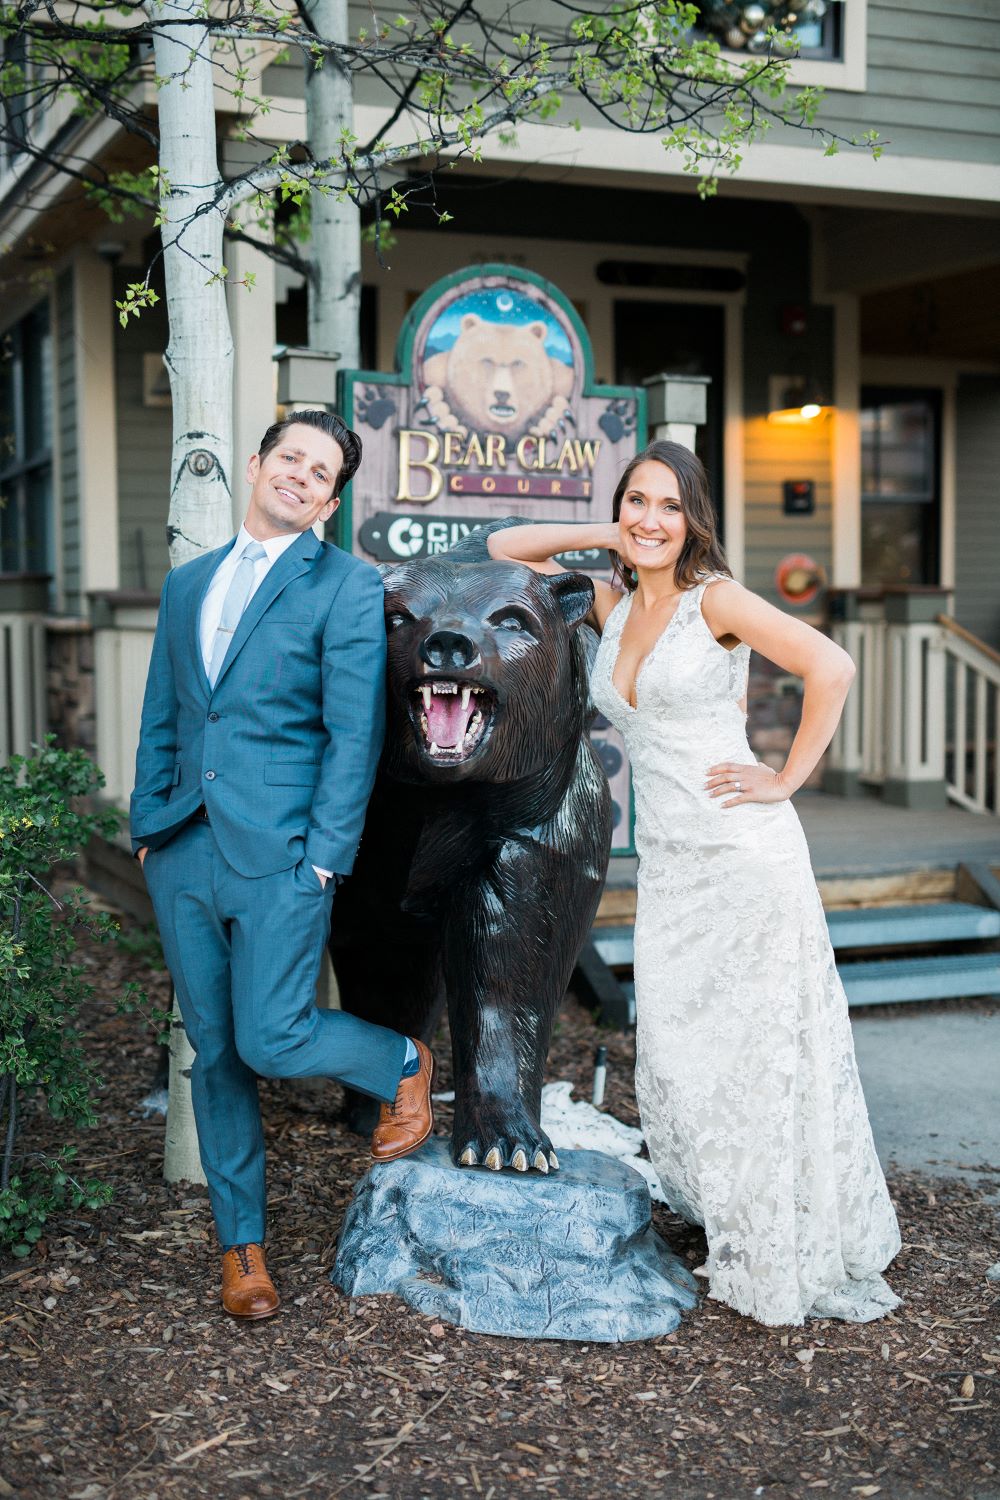 Newlyweds with sculpture of bear in Breckenridge